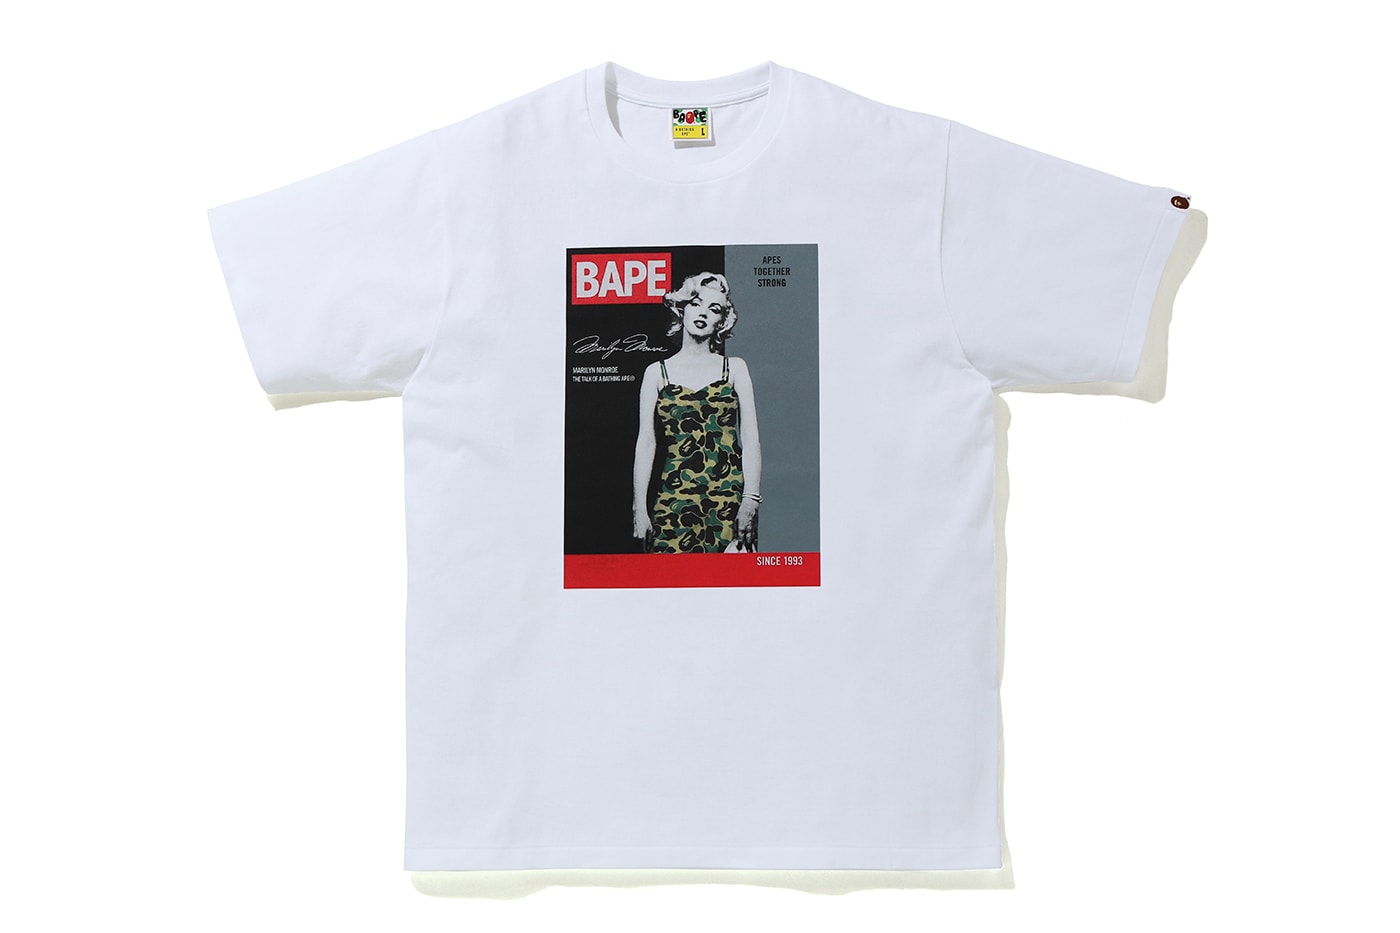 Marilyn Monroe A BATHING APE t-shirt collection Release Info bape Authentic Brands Group APE HEAD